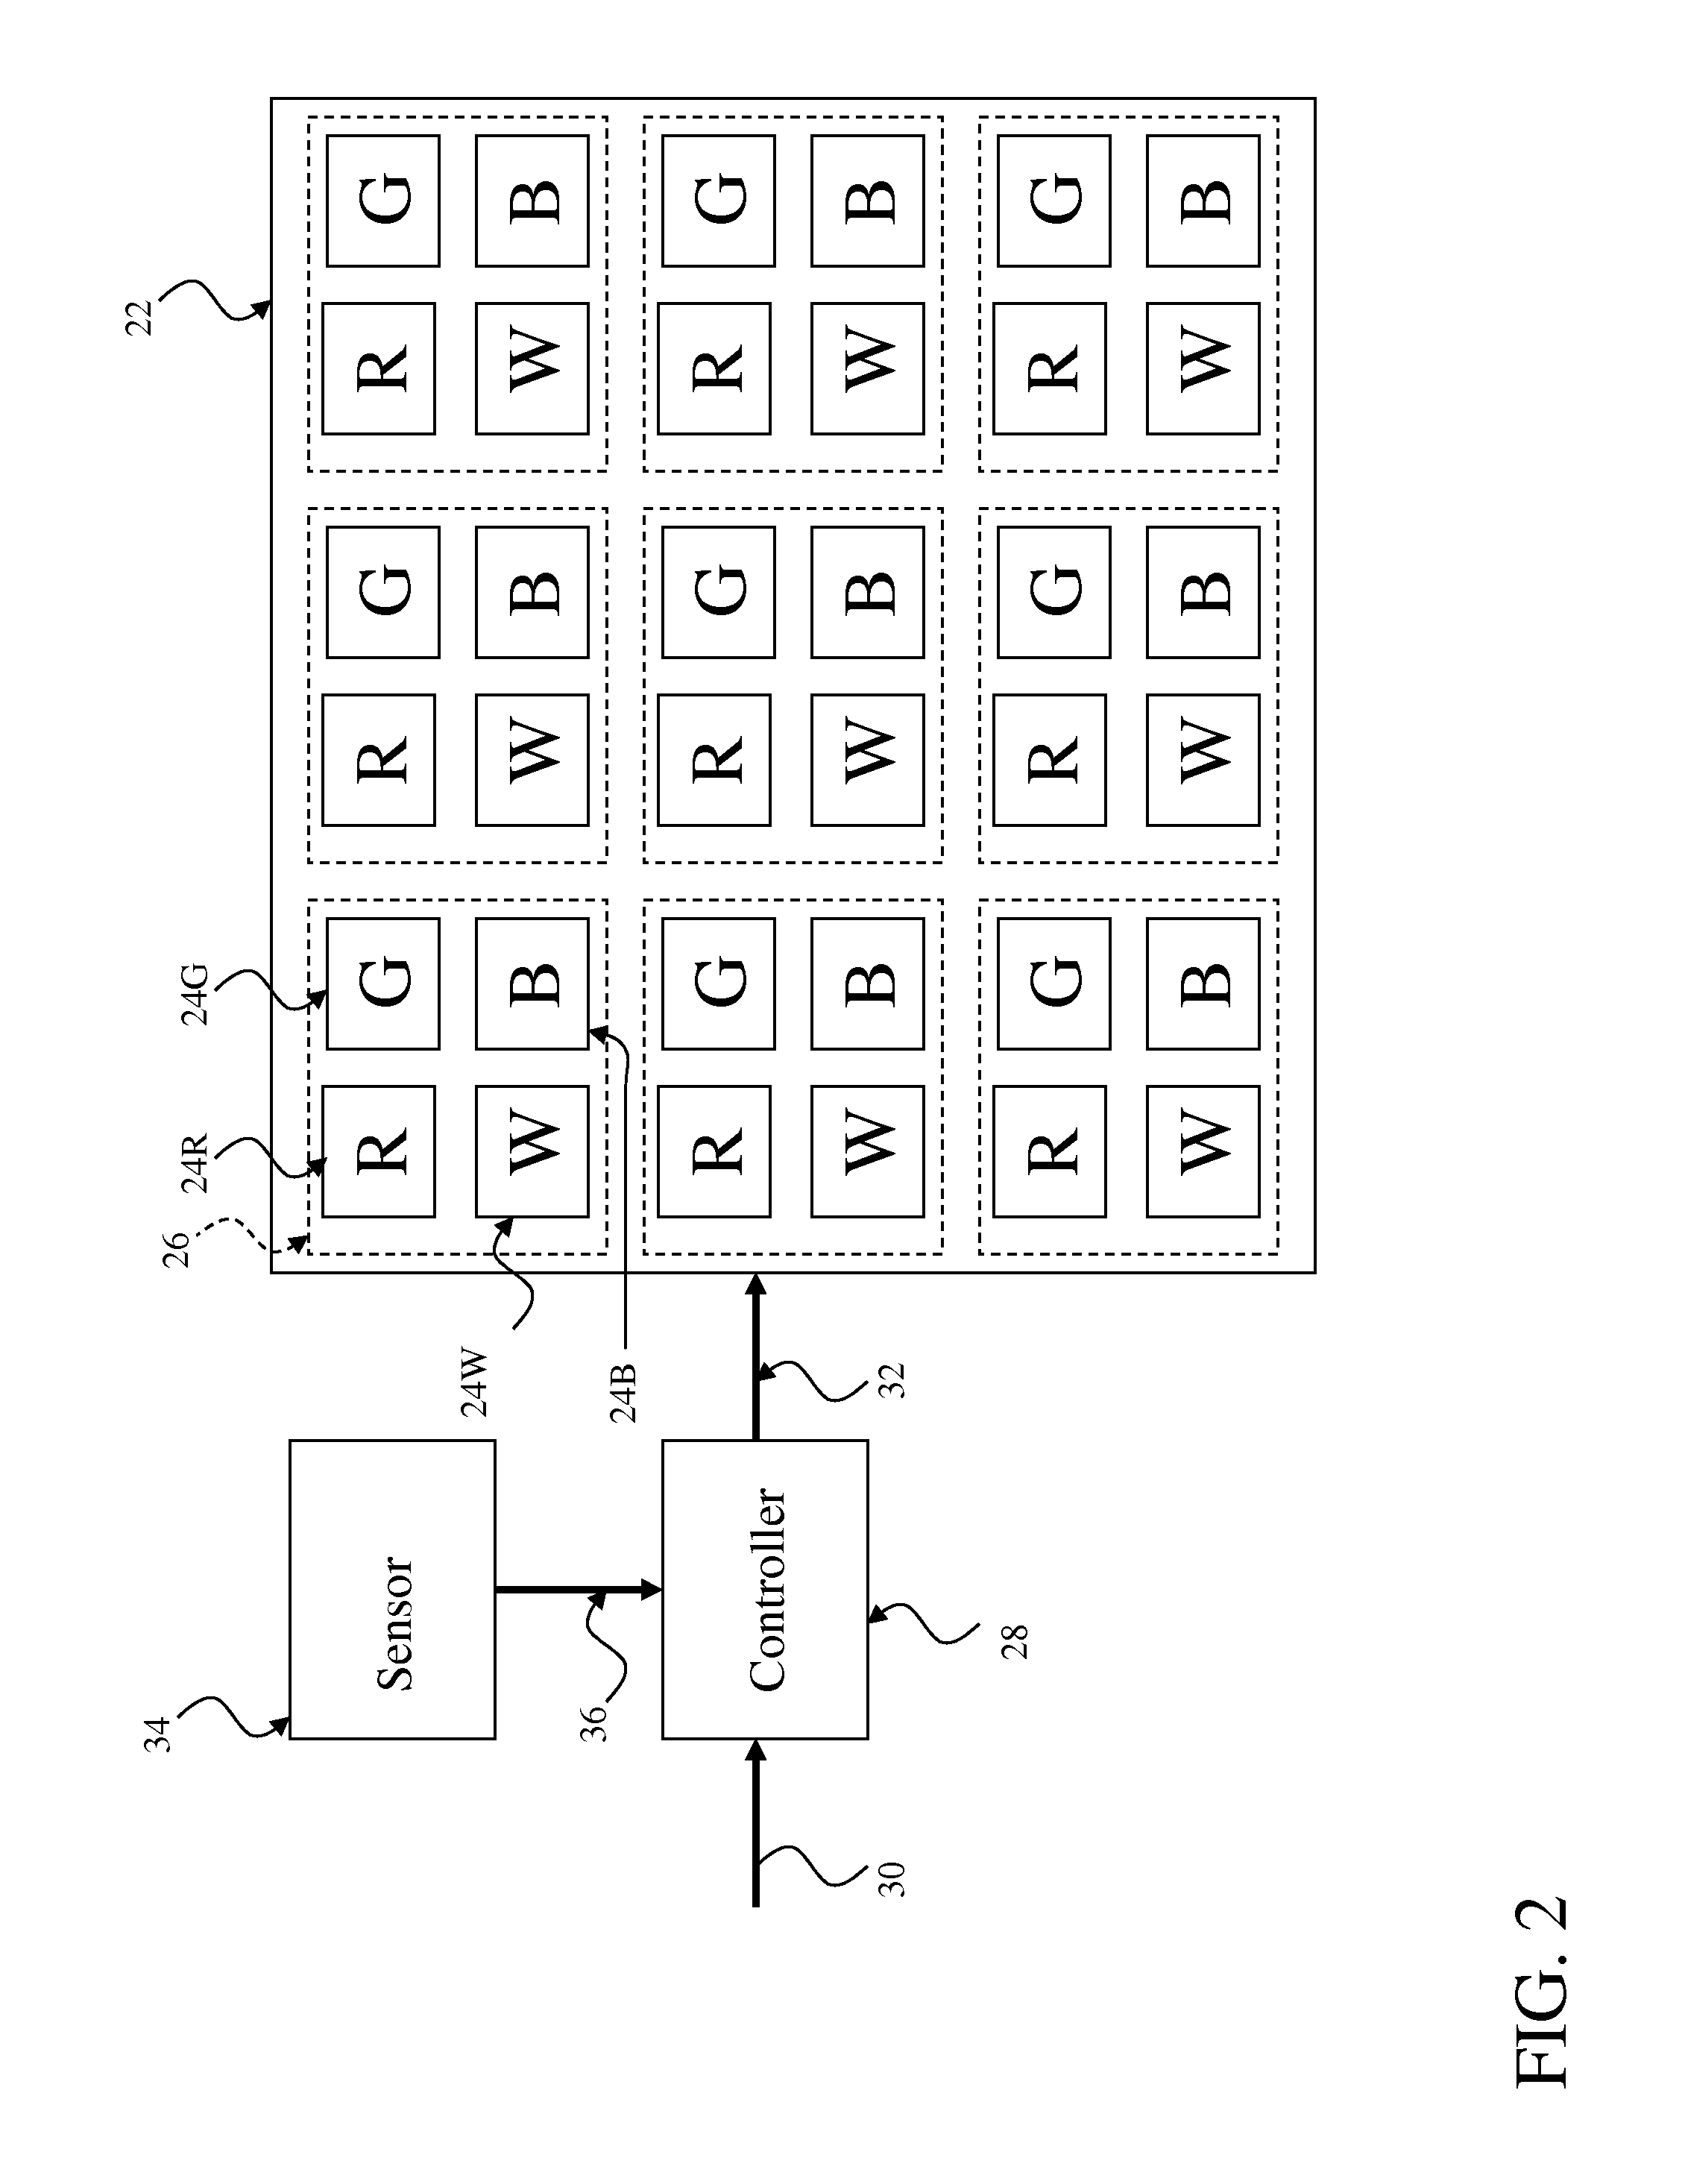 Four-channel display power reduction with desaturation